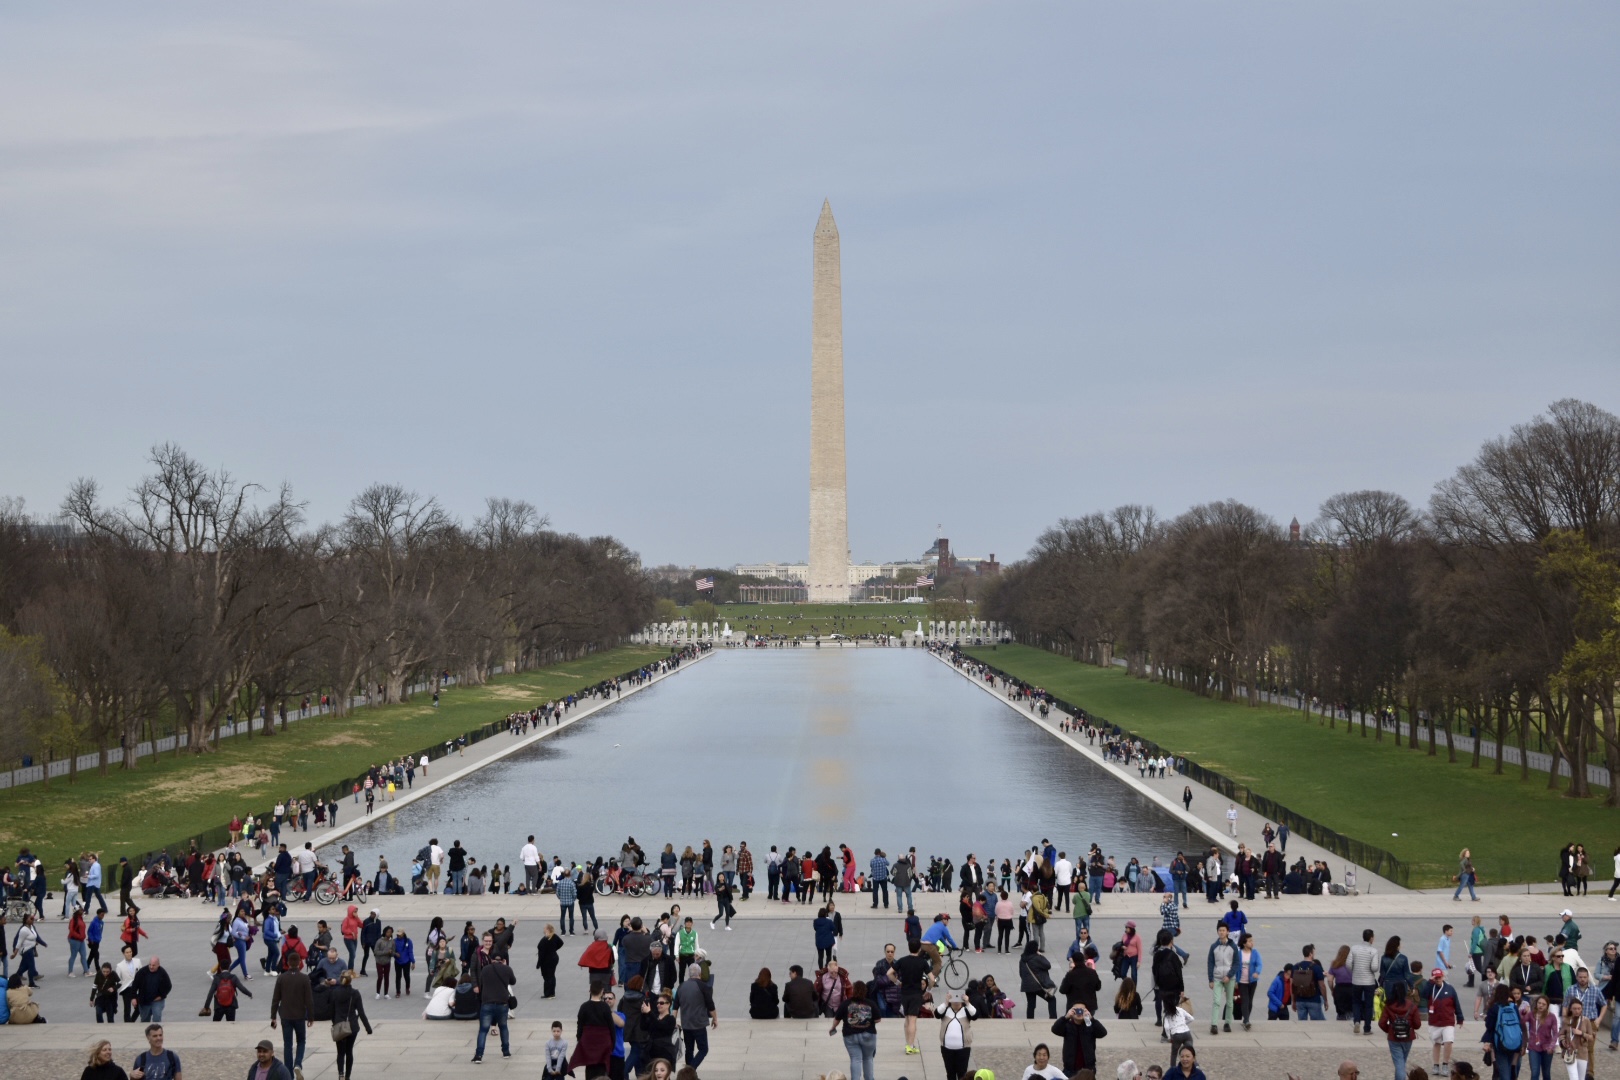 The Washington National Monument is seen from the reflecting pool in Washington DC. Ultimate Travel Guide To Dog Friendly Washington DC: